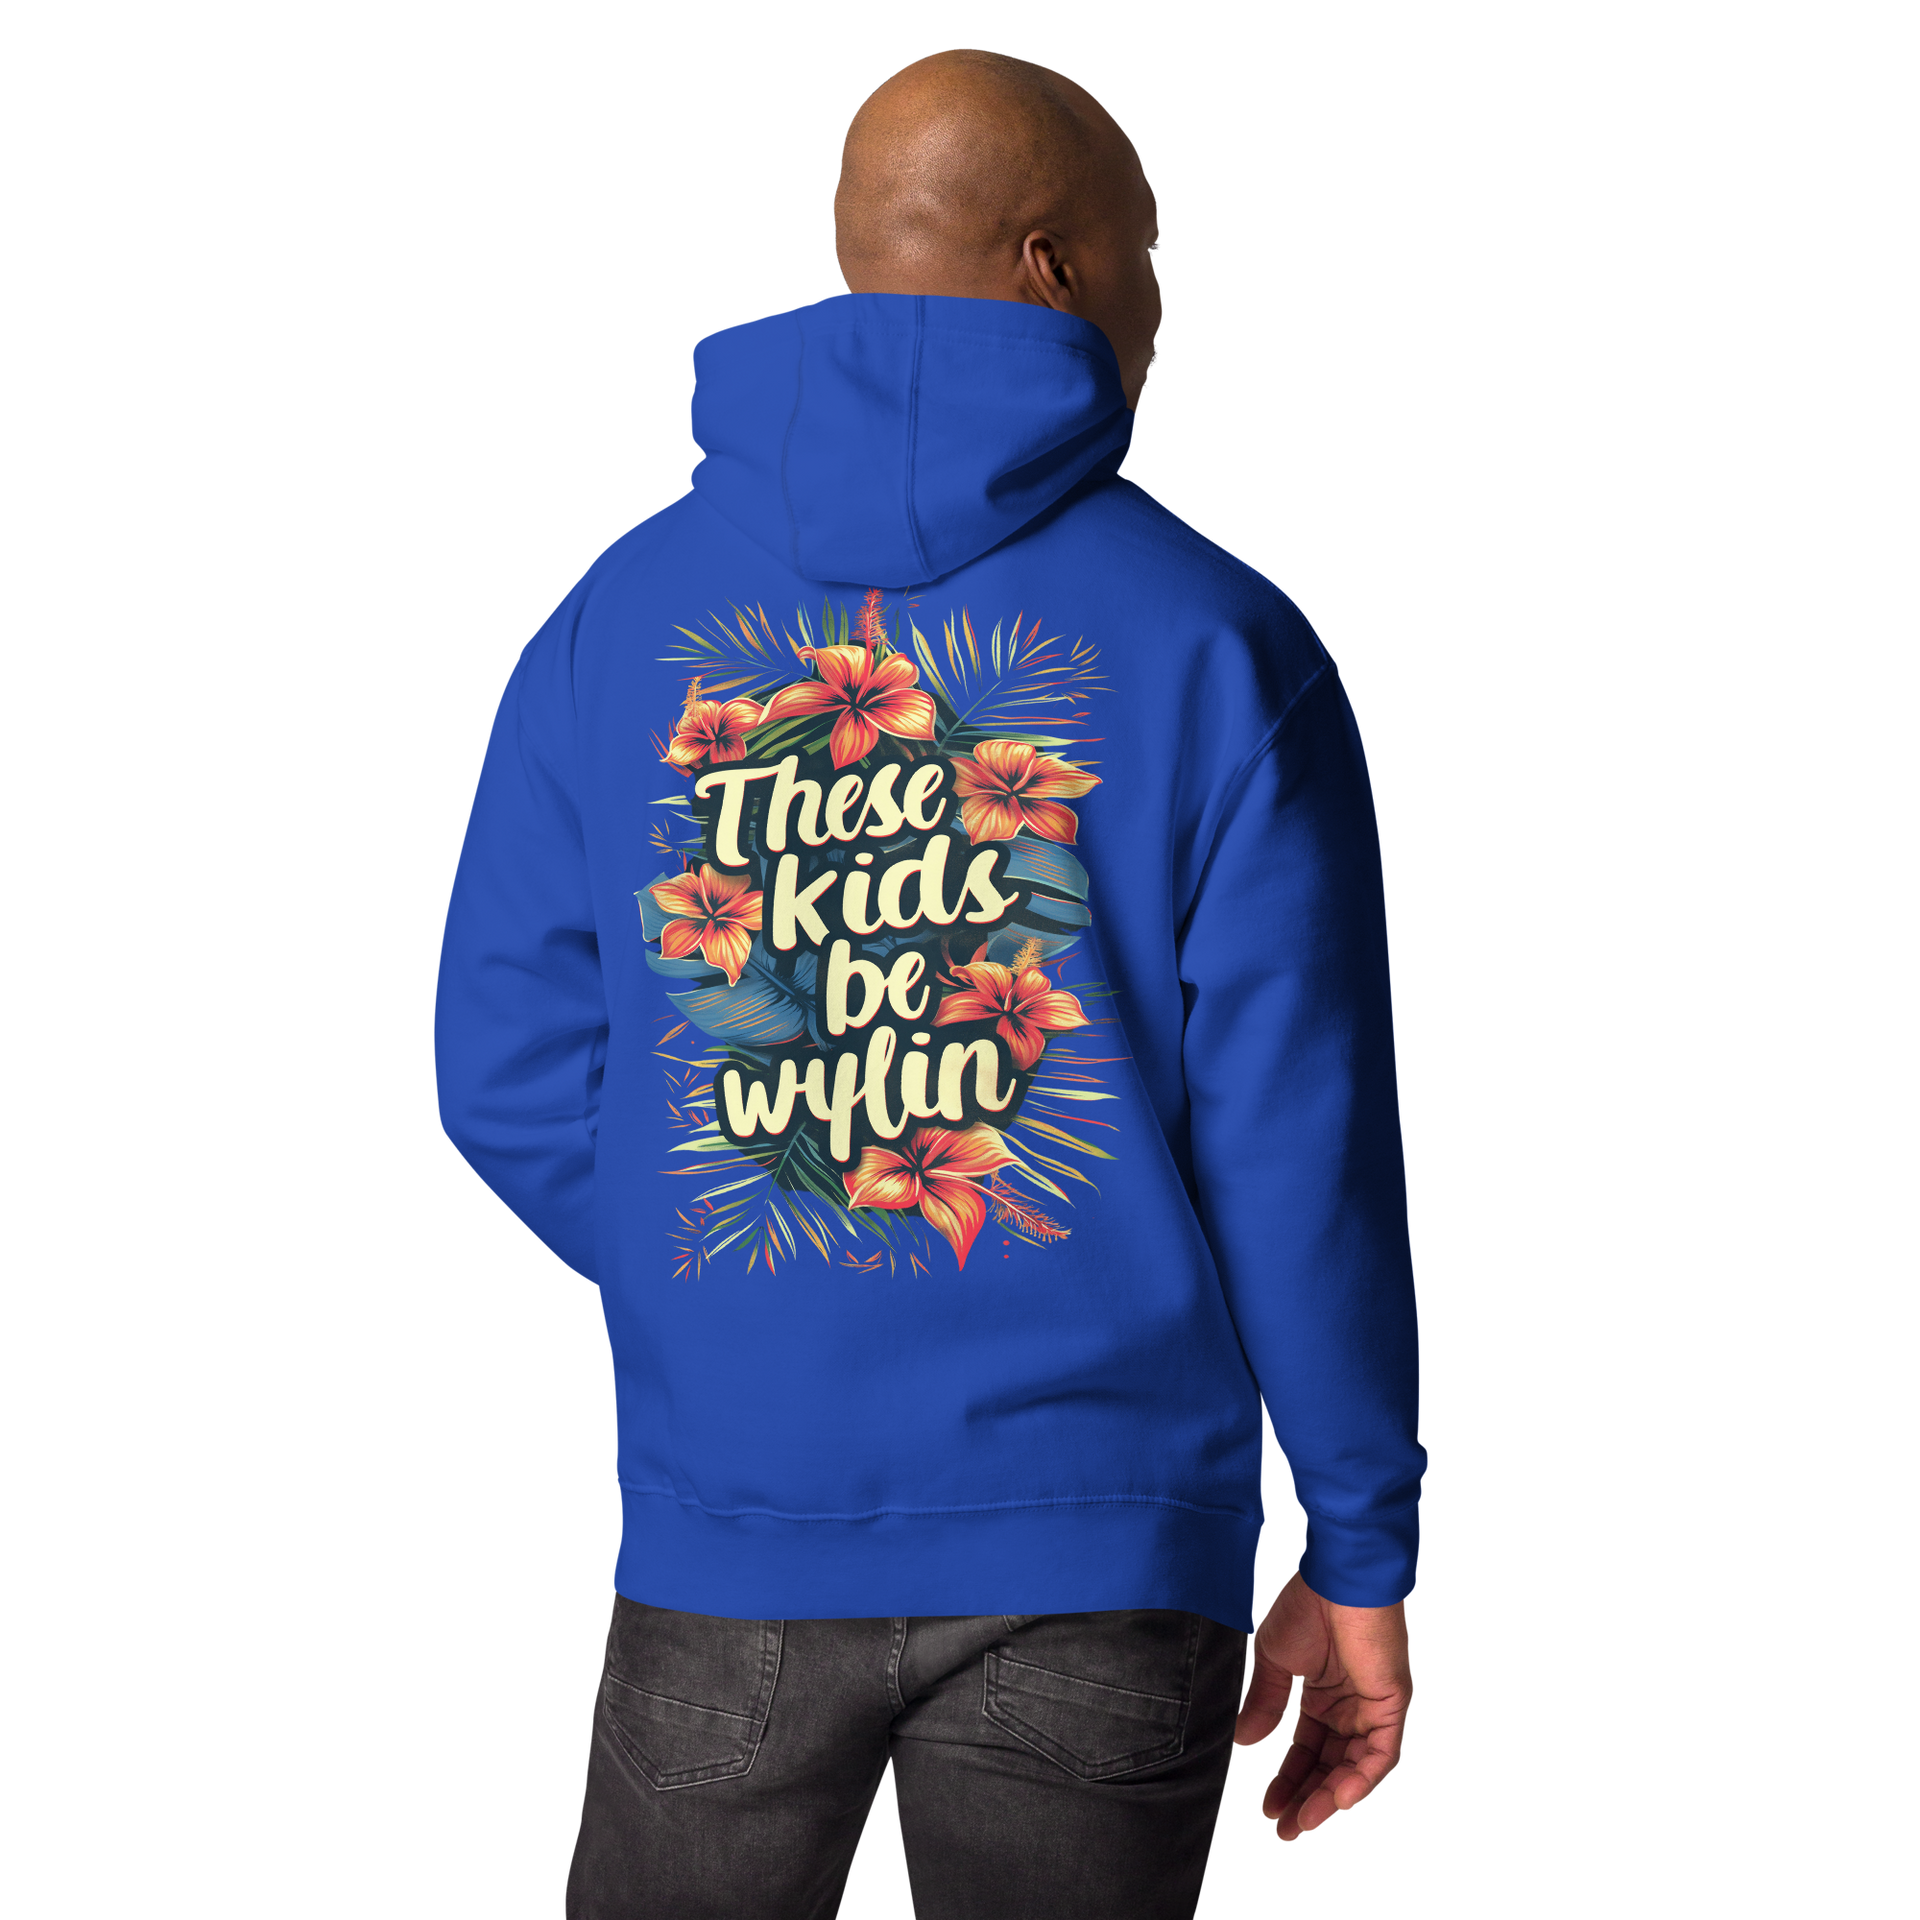 Blackstock | Limited Edition THESE KIDS BE WYLIN’ Unisex Hoodie